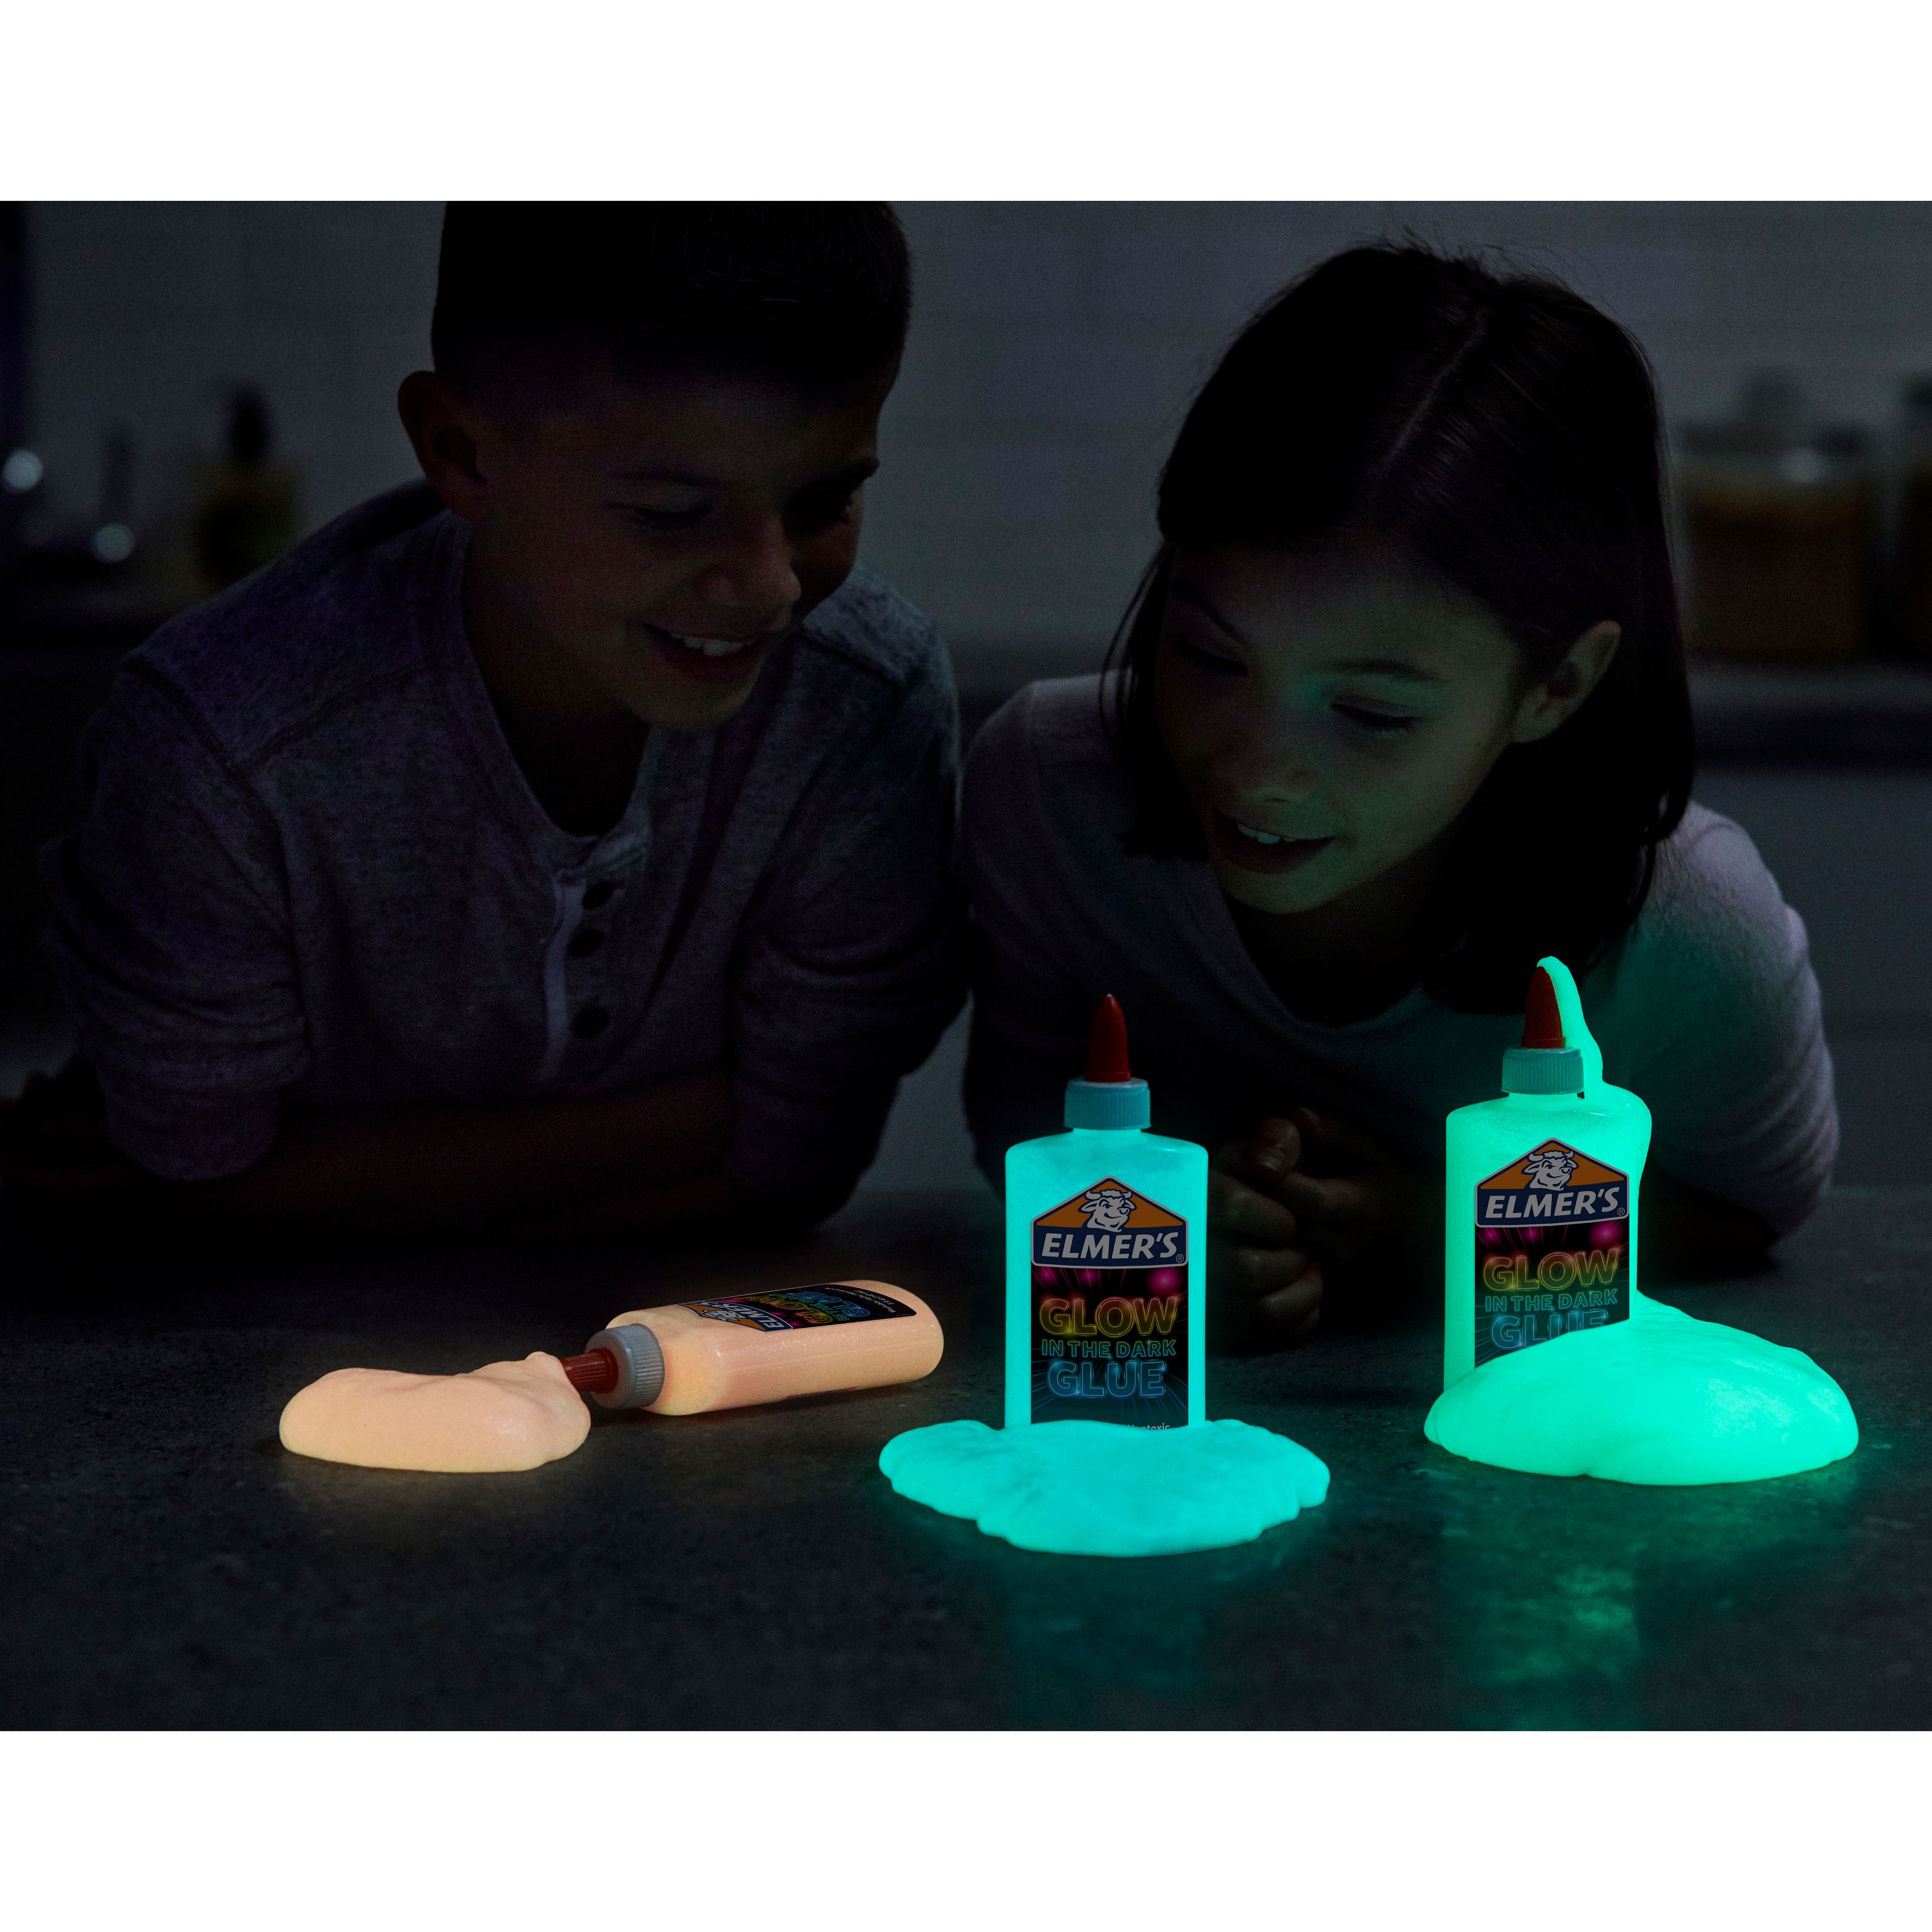 Elmers Brand Mega Slime Kit: Make Glow In The Dark, Color, and Clear Slimes  26000185493